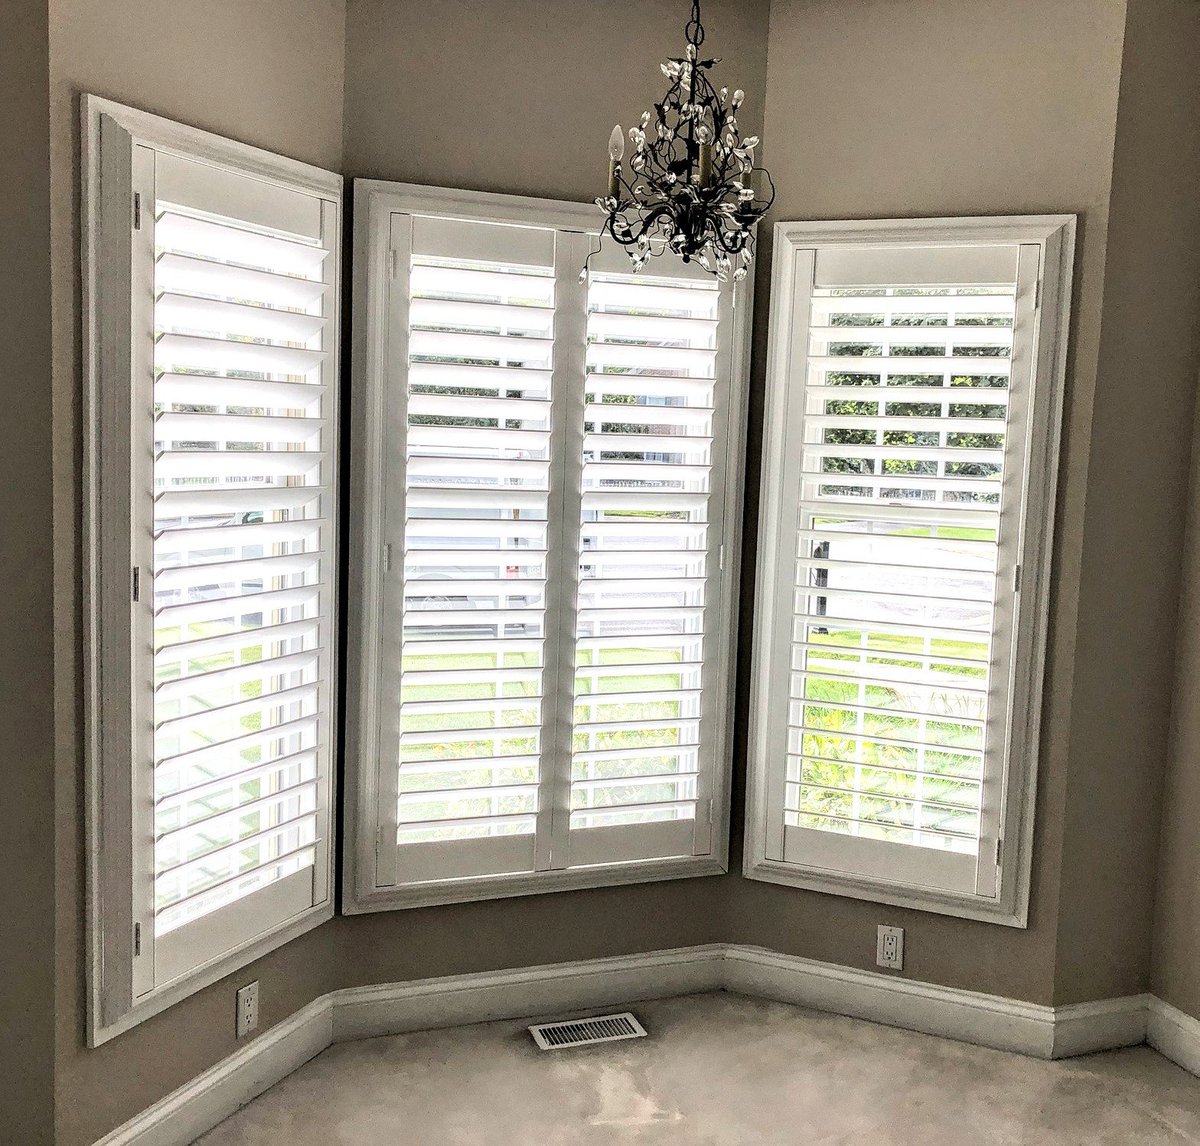 Could this have turned out any better!?! Thank you to my 1601 store for the lead 😍
@SASM1601 @HomeDepot @RockwoodShutter 
#TuesdayThoughts #shopathome #homedepot #WeAreTheMidAtlantic #makeyourhomebeautiful #OBSESSED #rockwoodshutters #TuesdayMotivation #homedecor #windowstyles